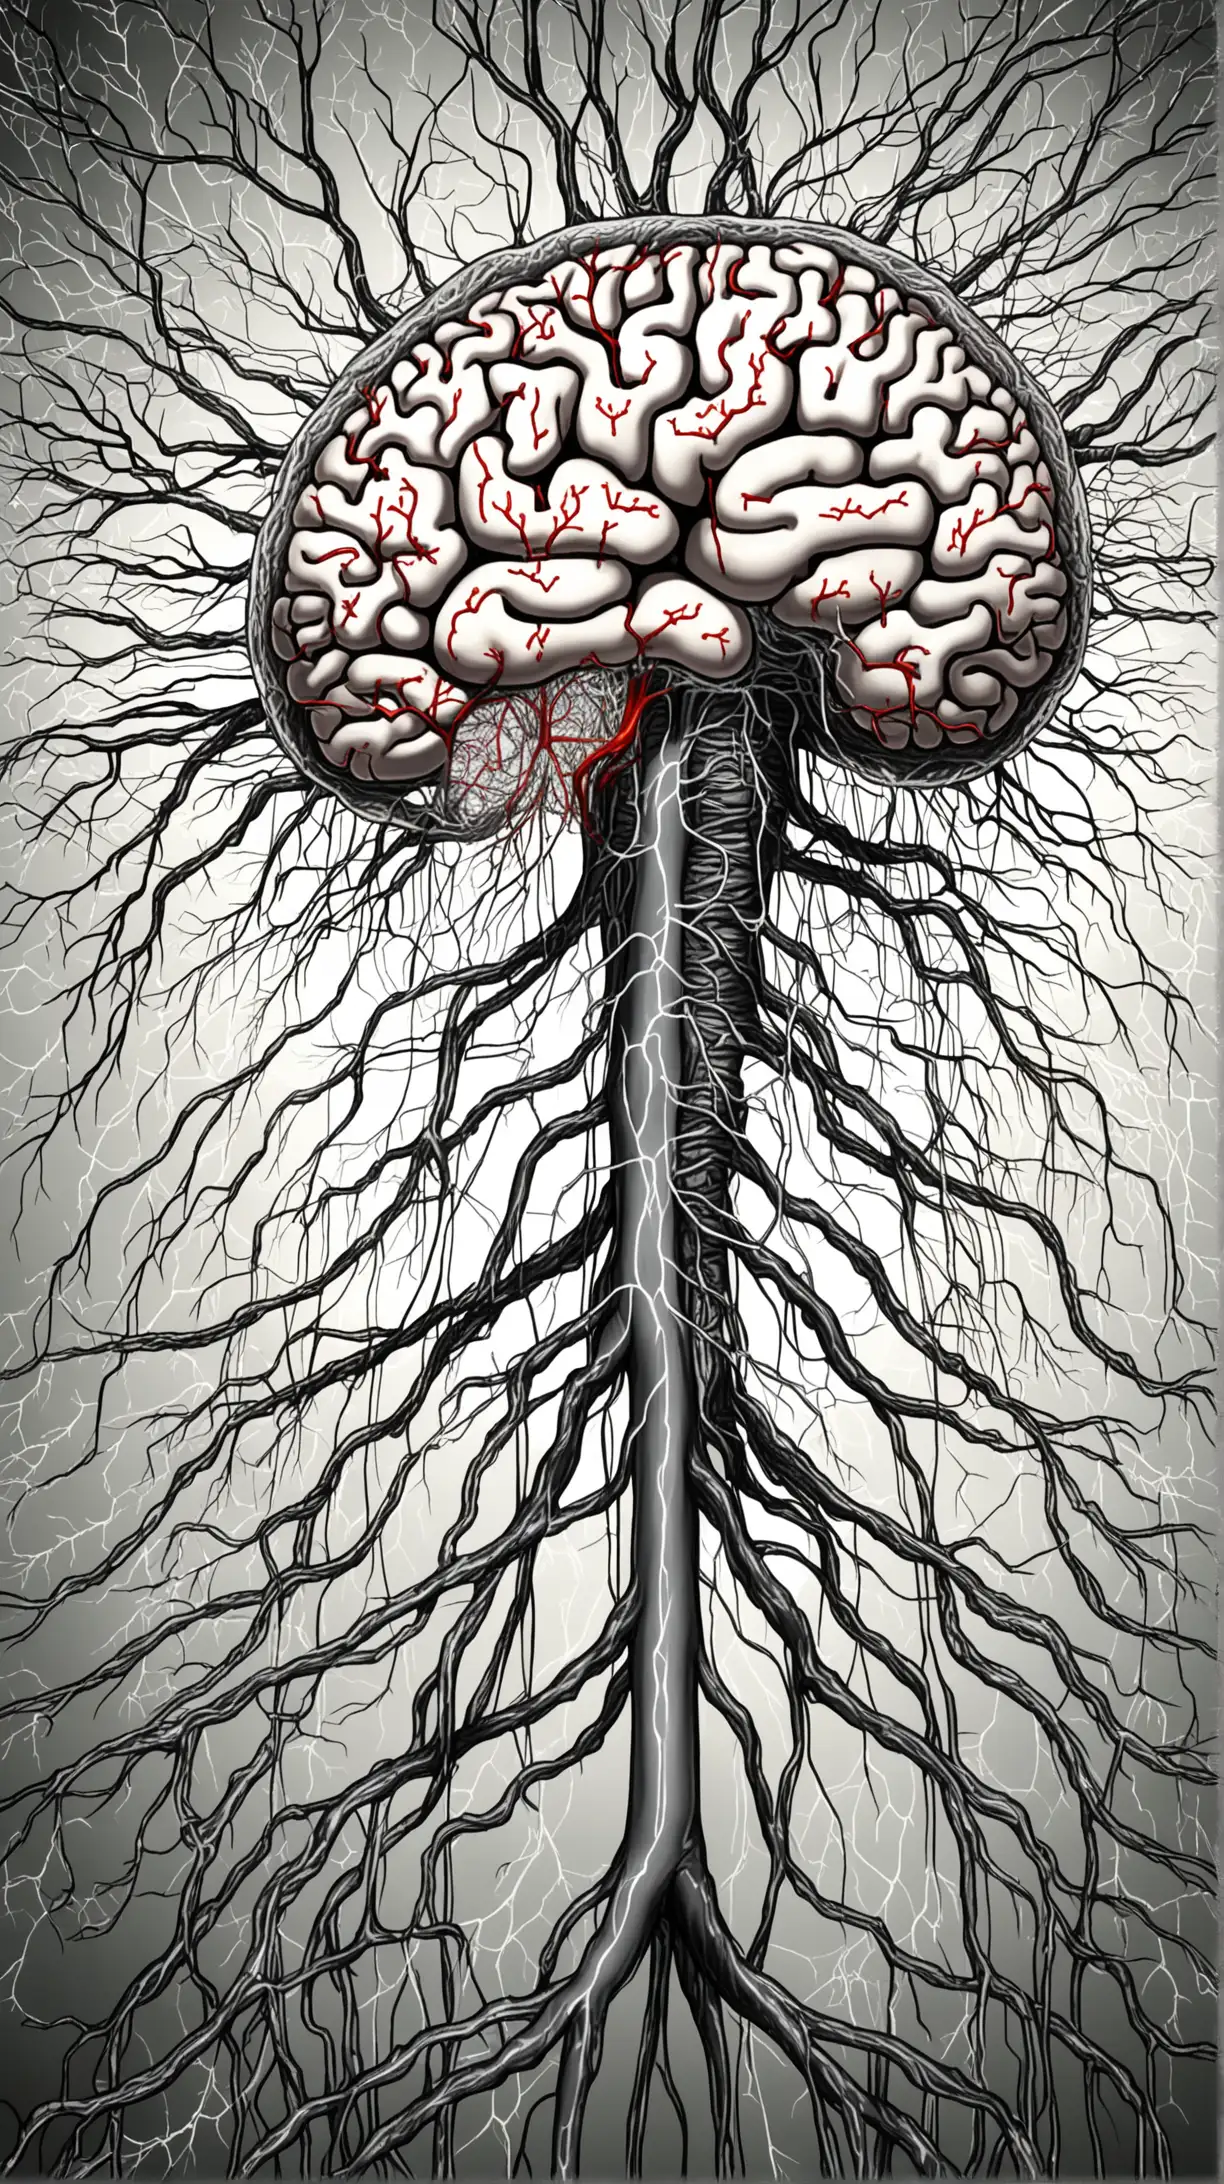 a drawing of a brain on a branch, nervous system, nerve system, visible nervous system, with arteries as roots, neuron, nerve cells, rhizomatic network, root system, immortal neuron, neuron dendritic monster, human circulatory system, blood vessels, grey matter and neurons, axon, dense web of neurons firing